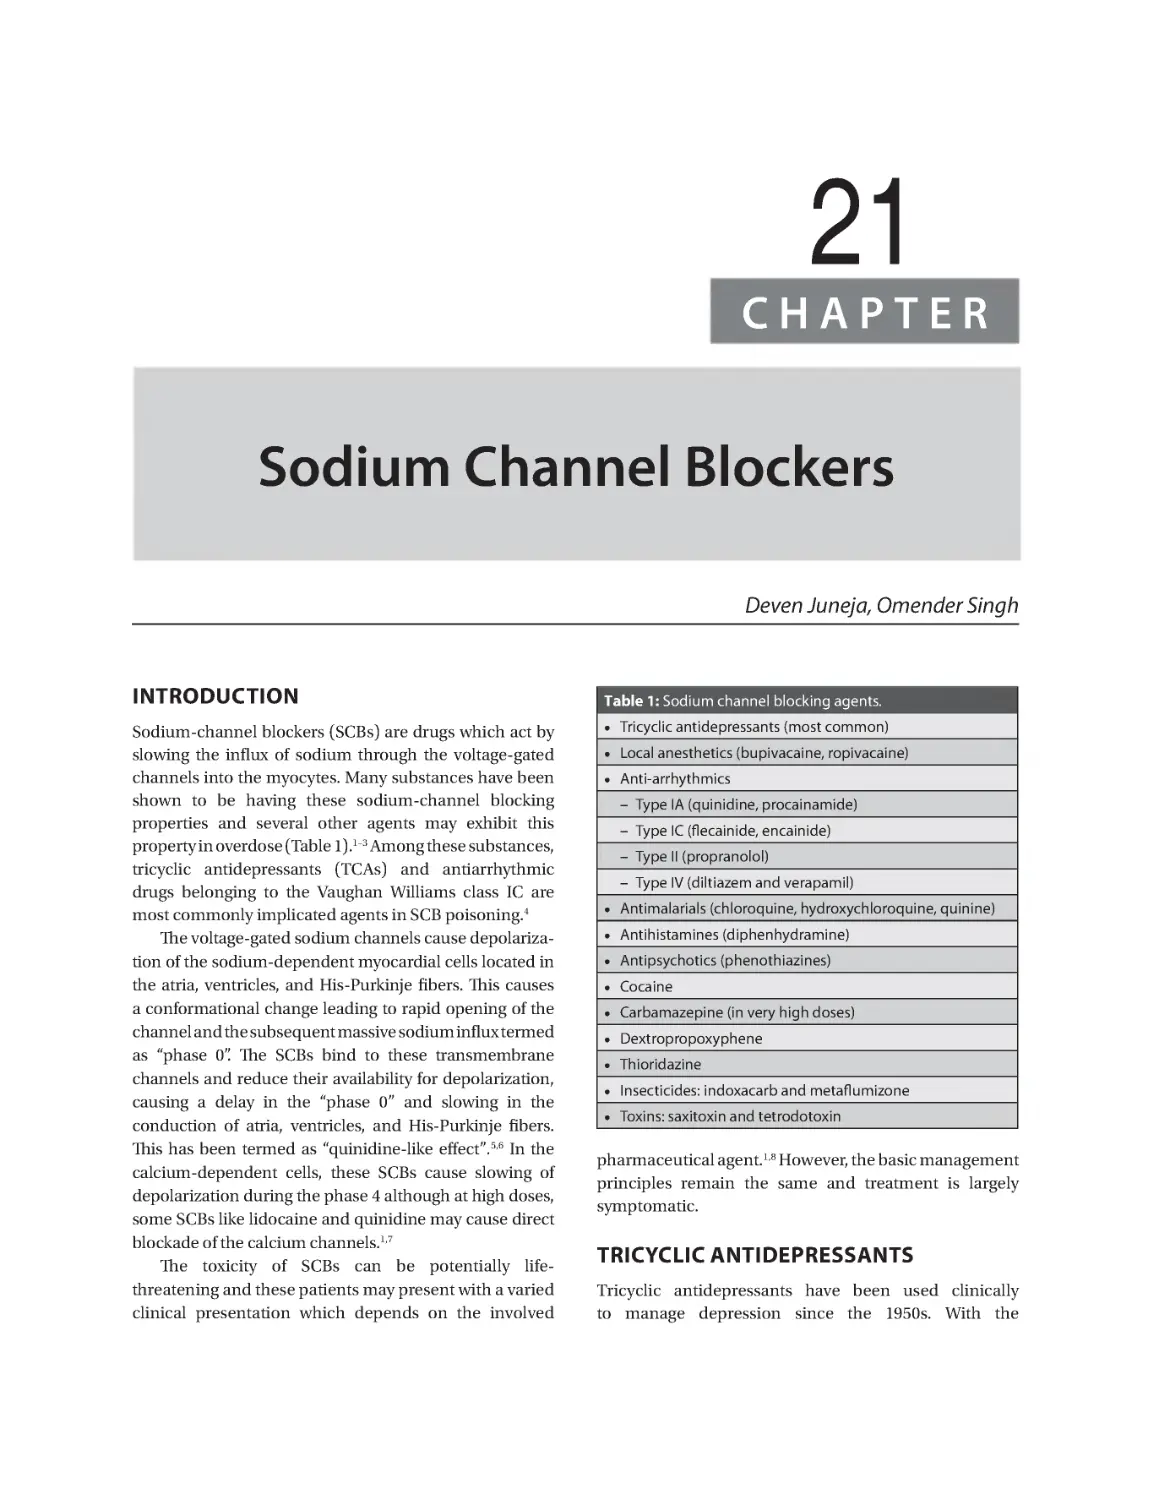 Chapter 21: Sodium Channel Blockers